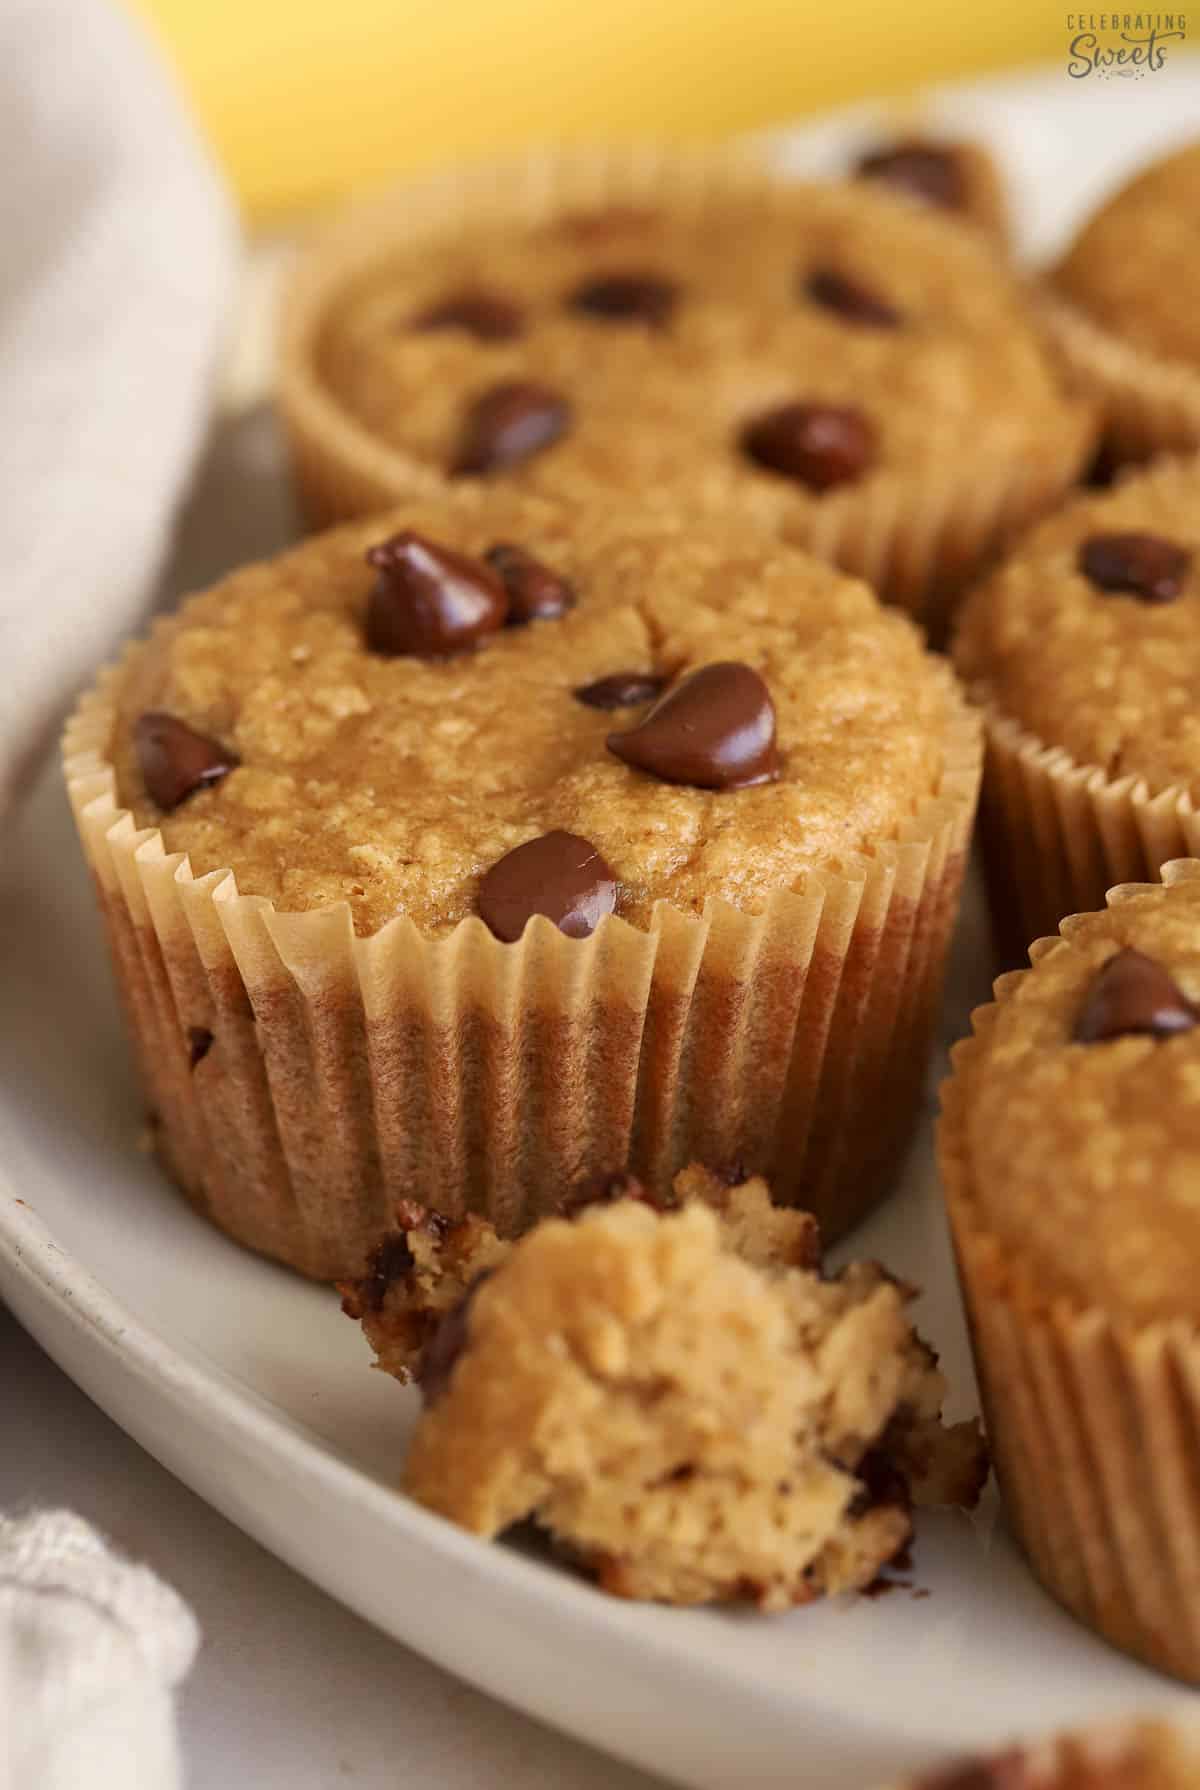 Banana oatmeal muffins topped with chocolate chips on a grey plate,